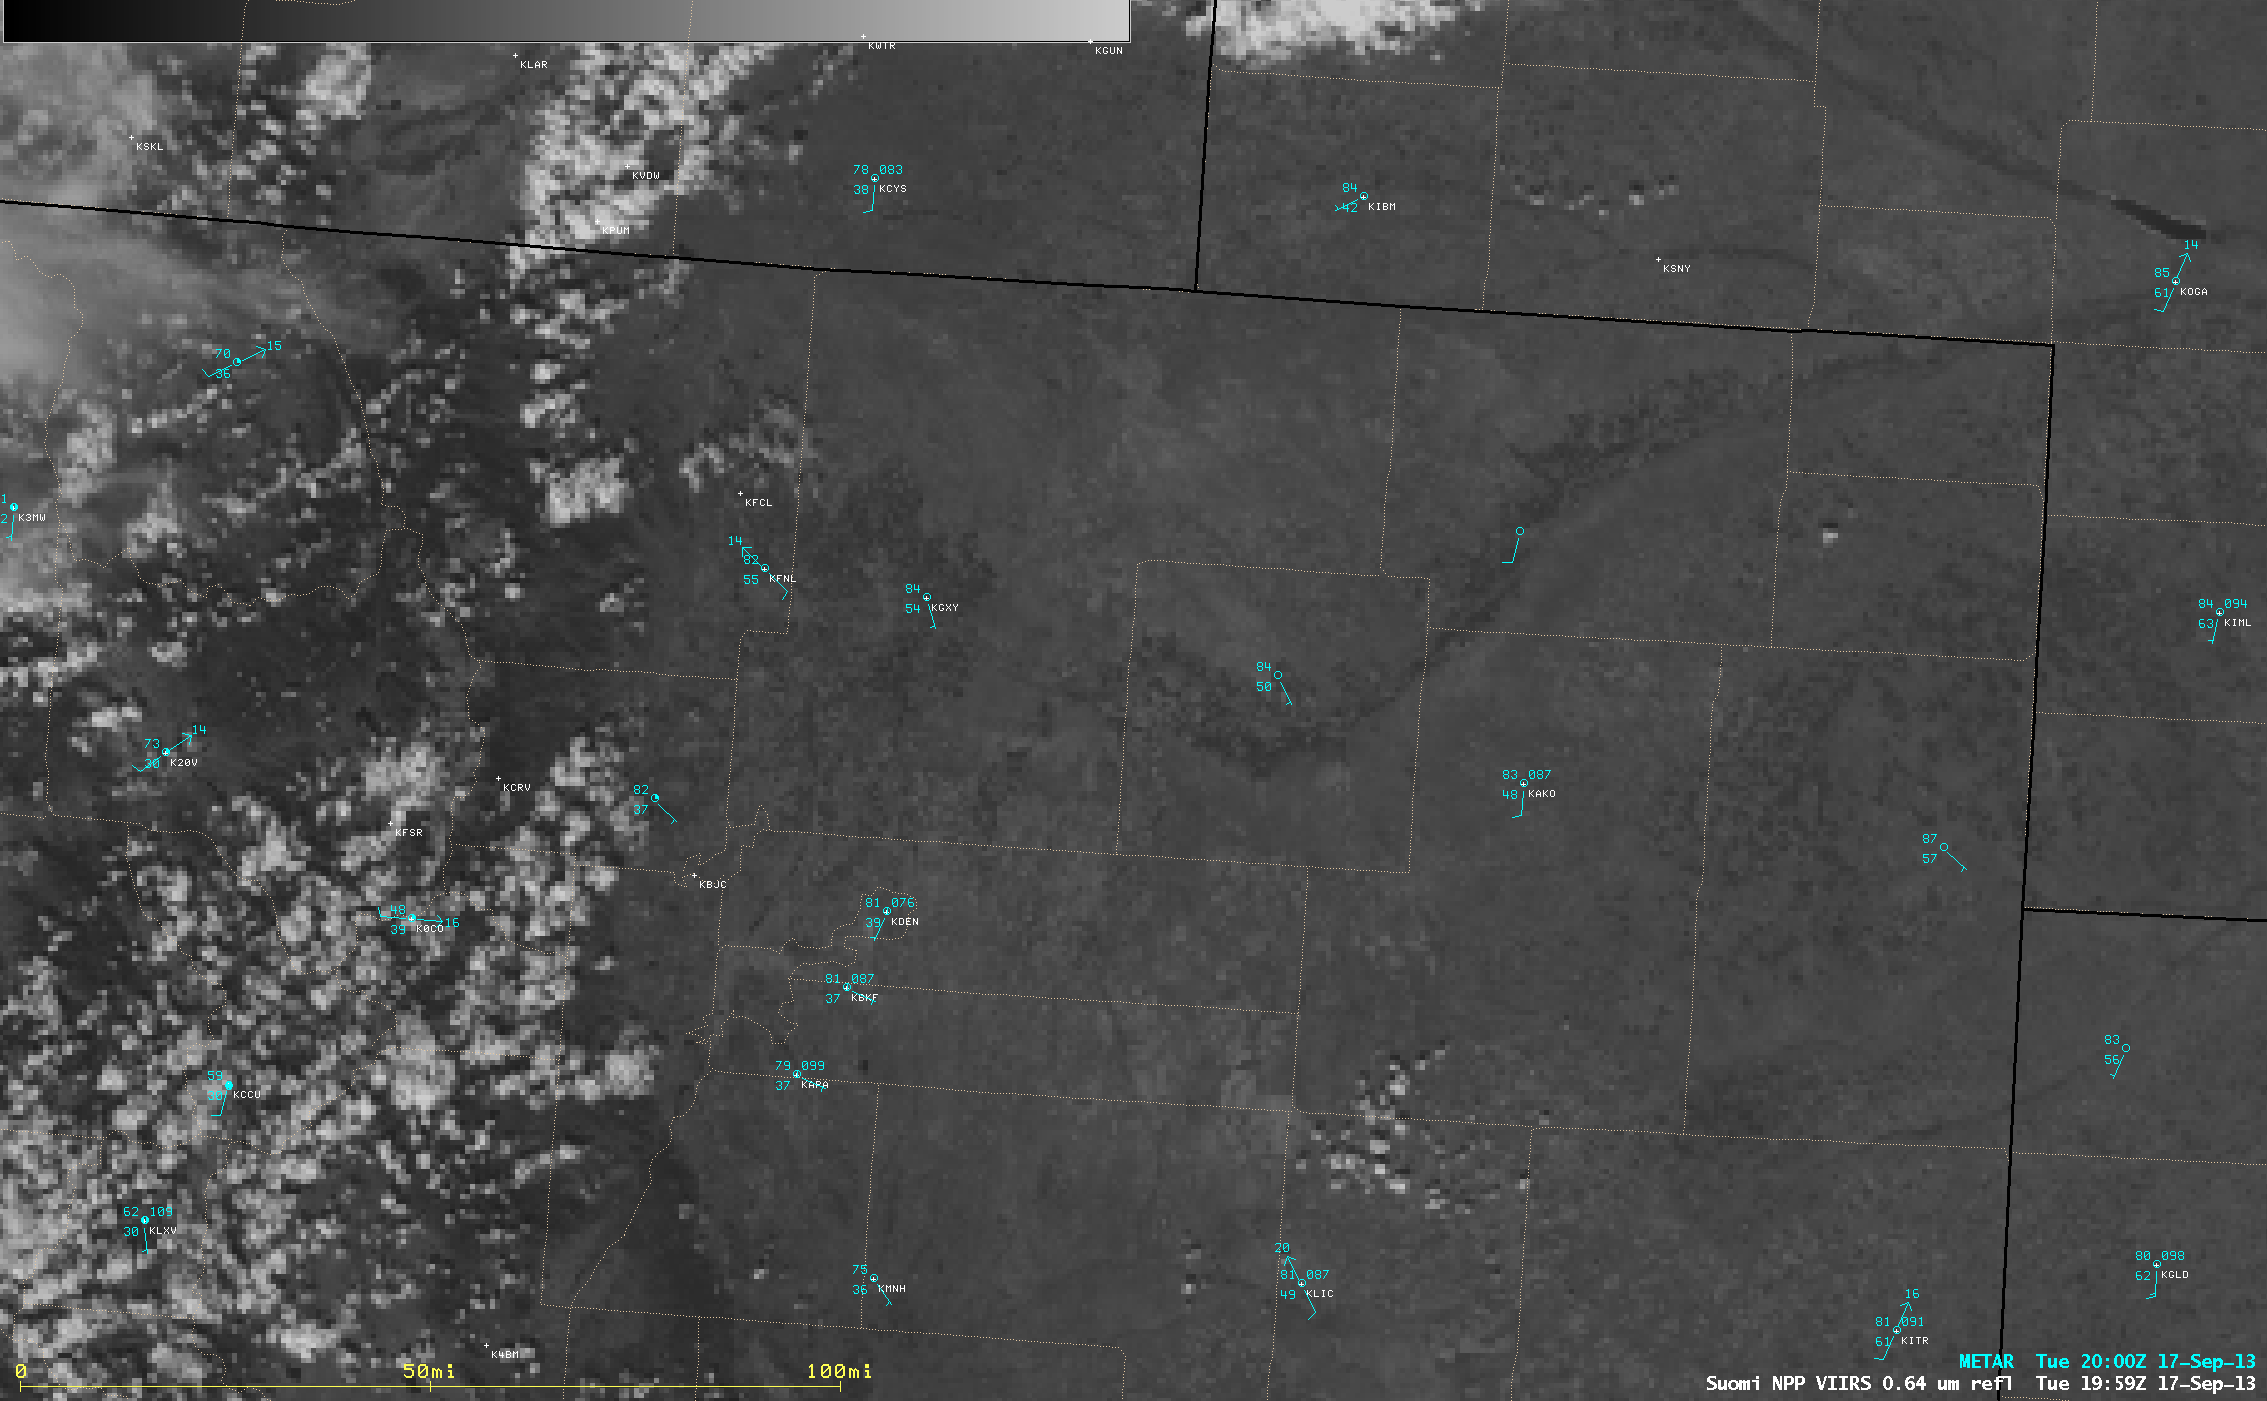 Suomi NPP VIIRS 0.64 Âµm visible channel and 1.61 Âµm near-IR channel images